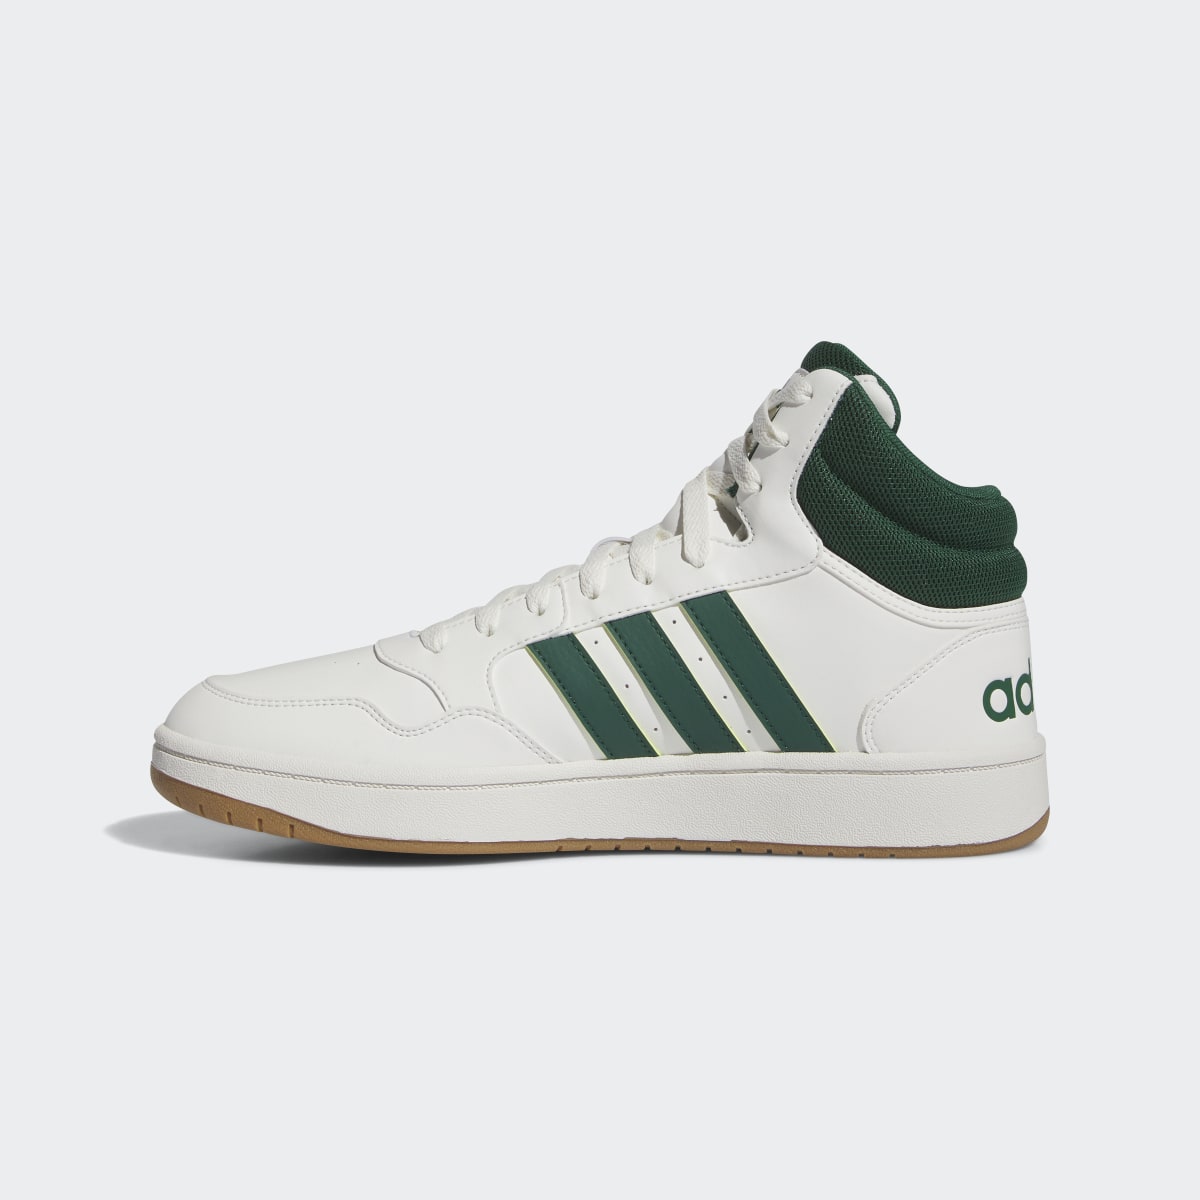 Adidas Hoops 3.0 Mid Lifestyle Basketball Classic Vintage Schuh. 7